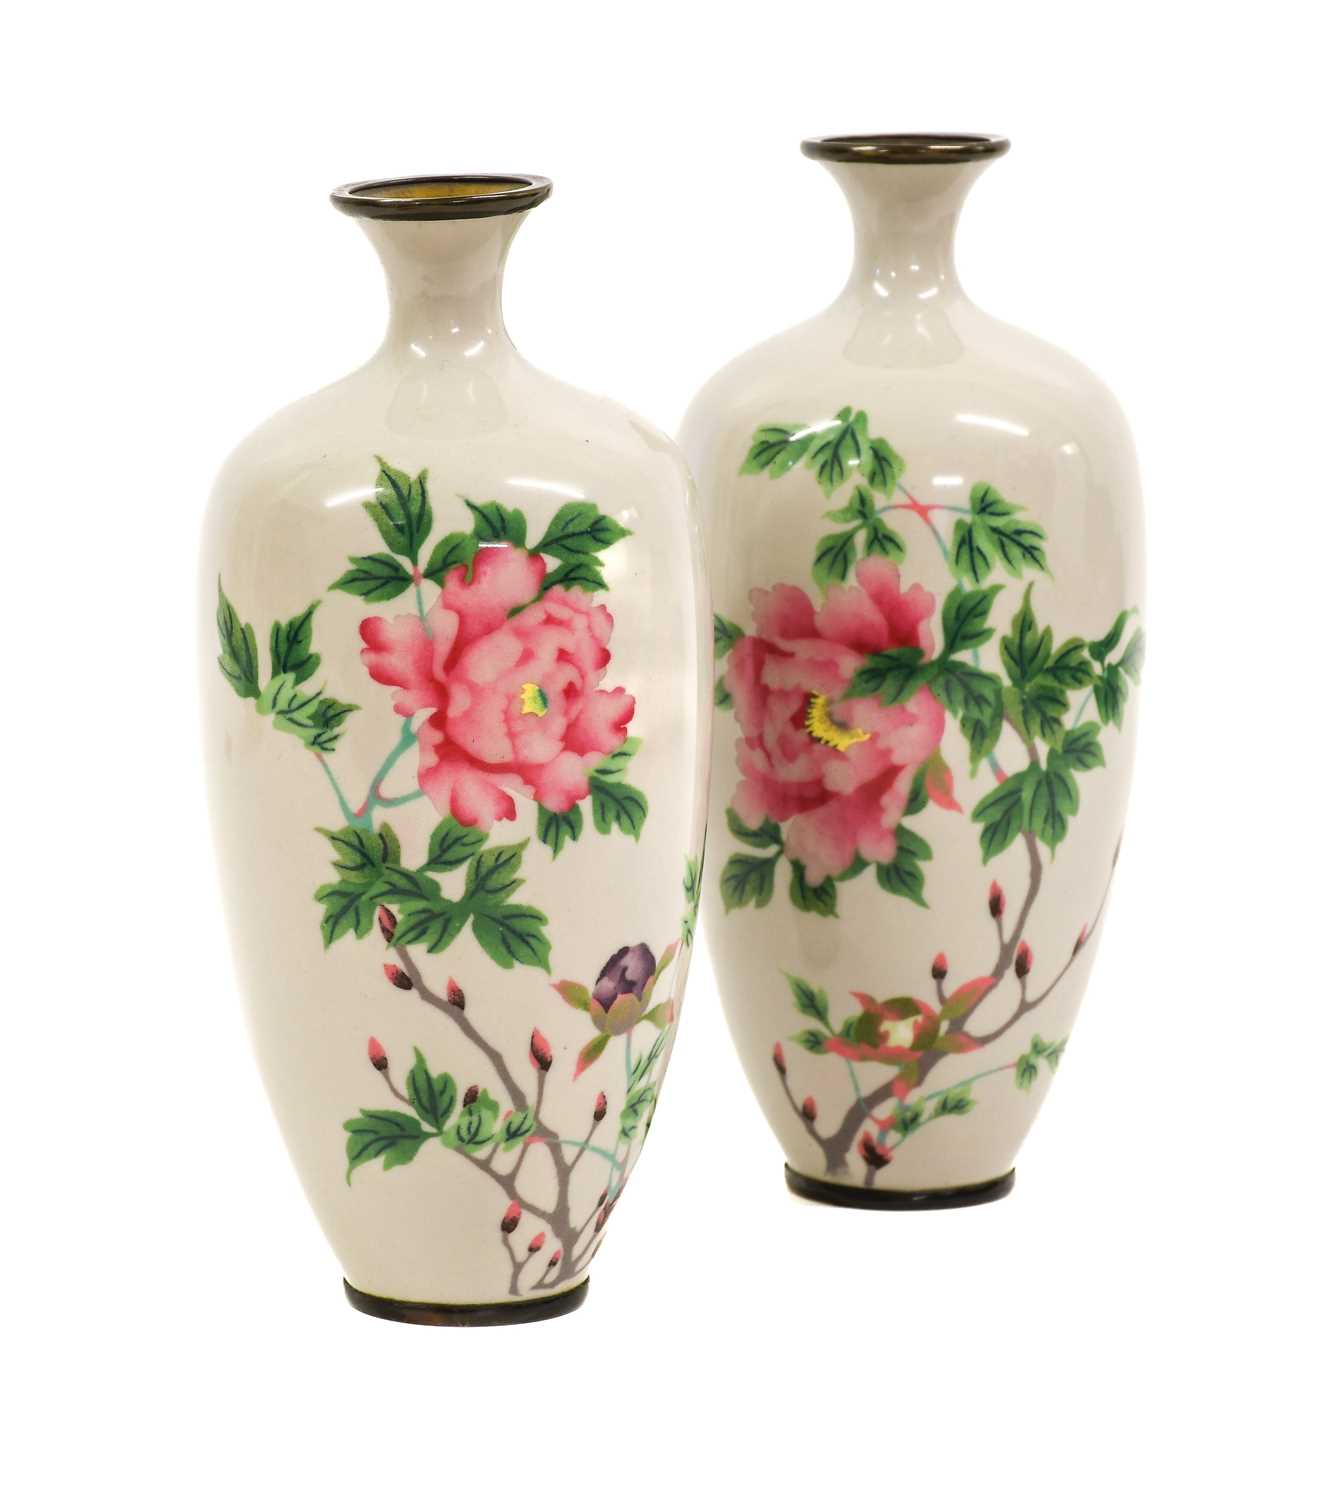 A Pair of Japanese Cloisonne Enamel Vases, Meiji/Taisho period, of baluster form with flared